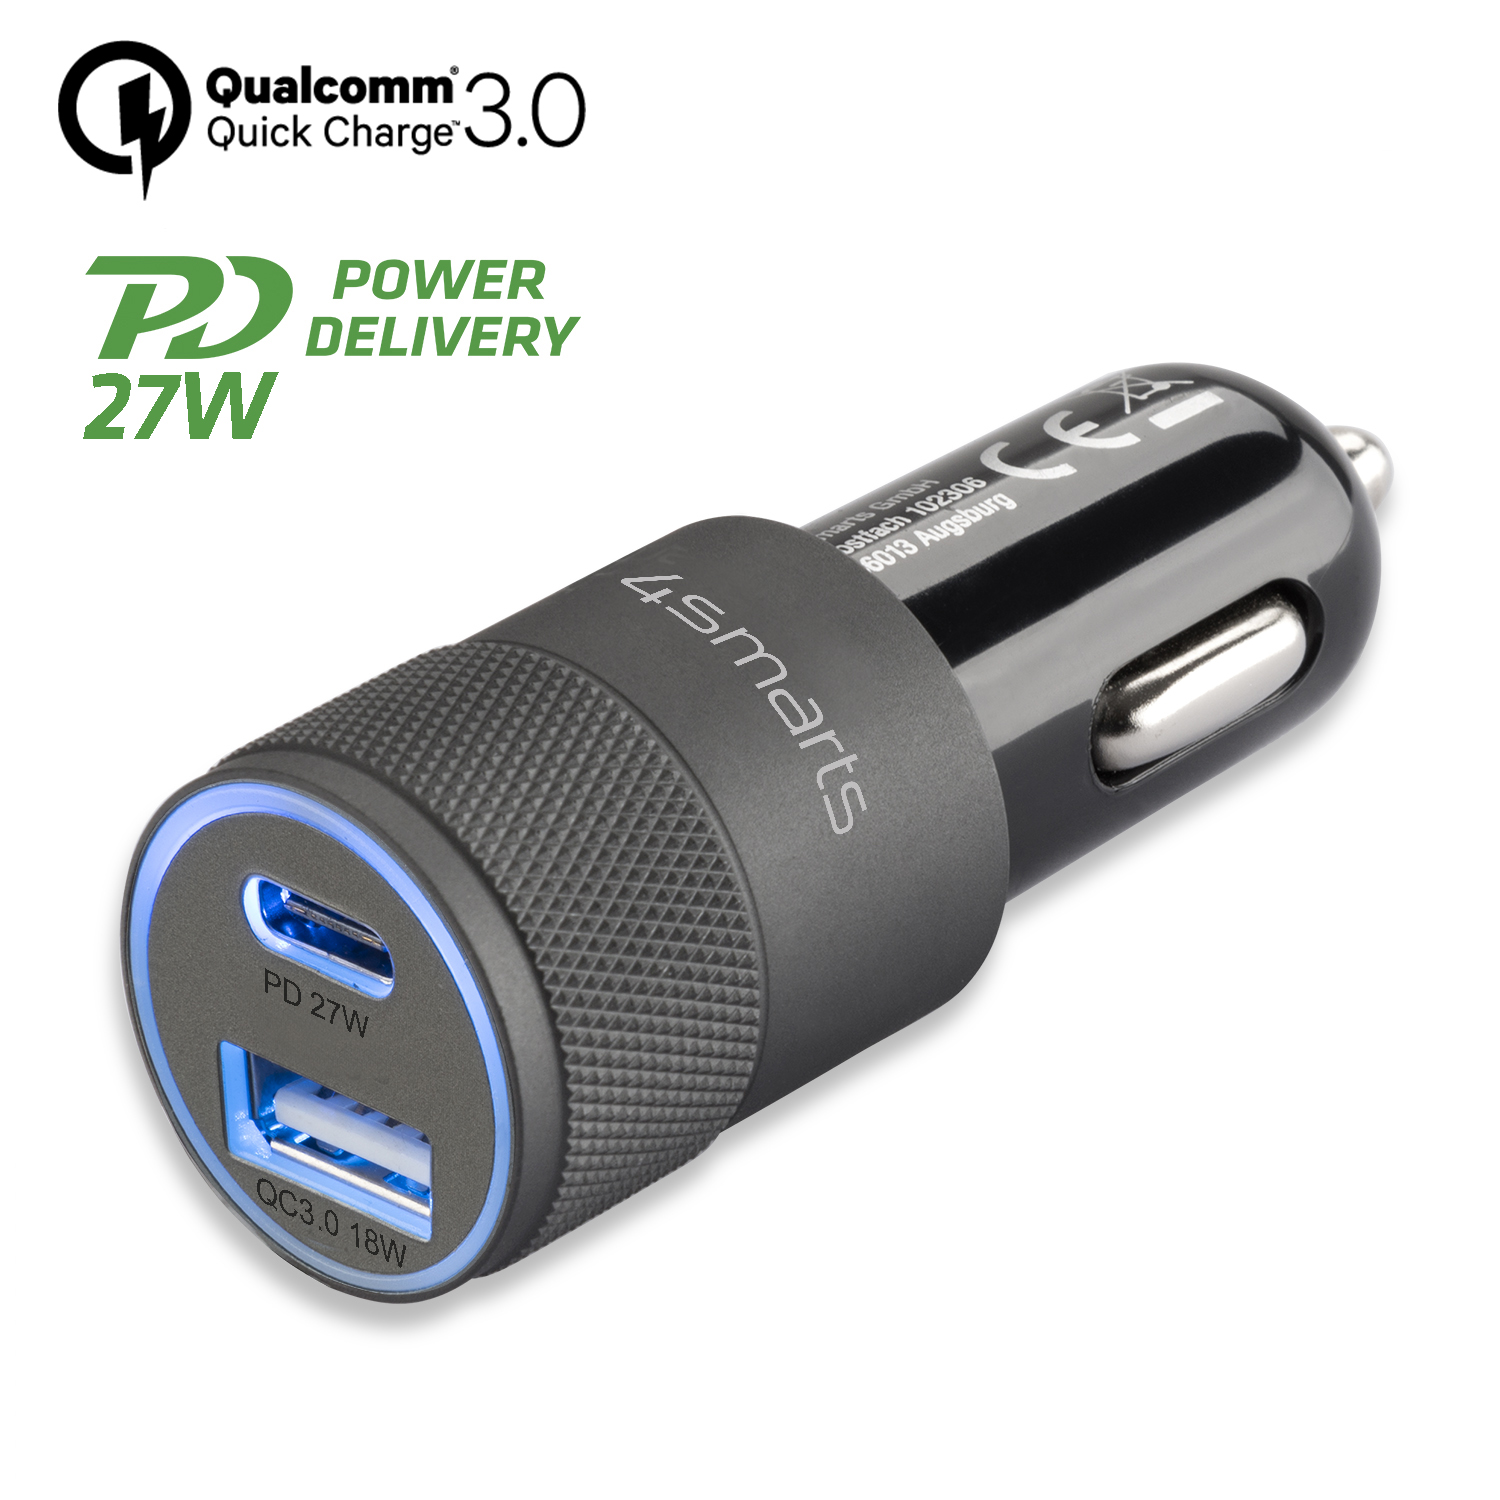 4SMARTS Rapid+ mit Quick Adapter 27W Charge PD